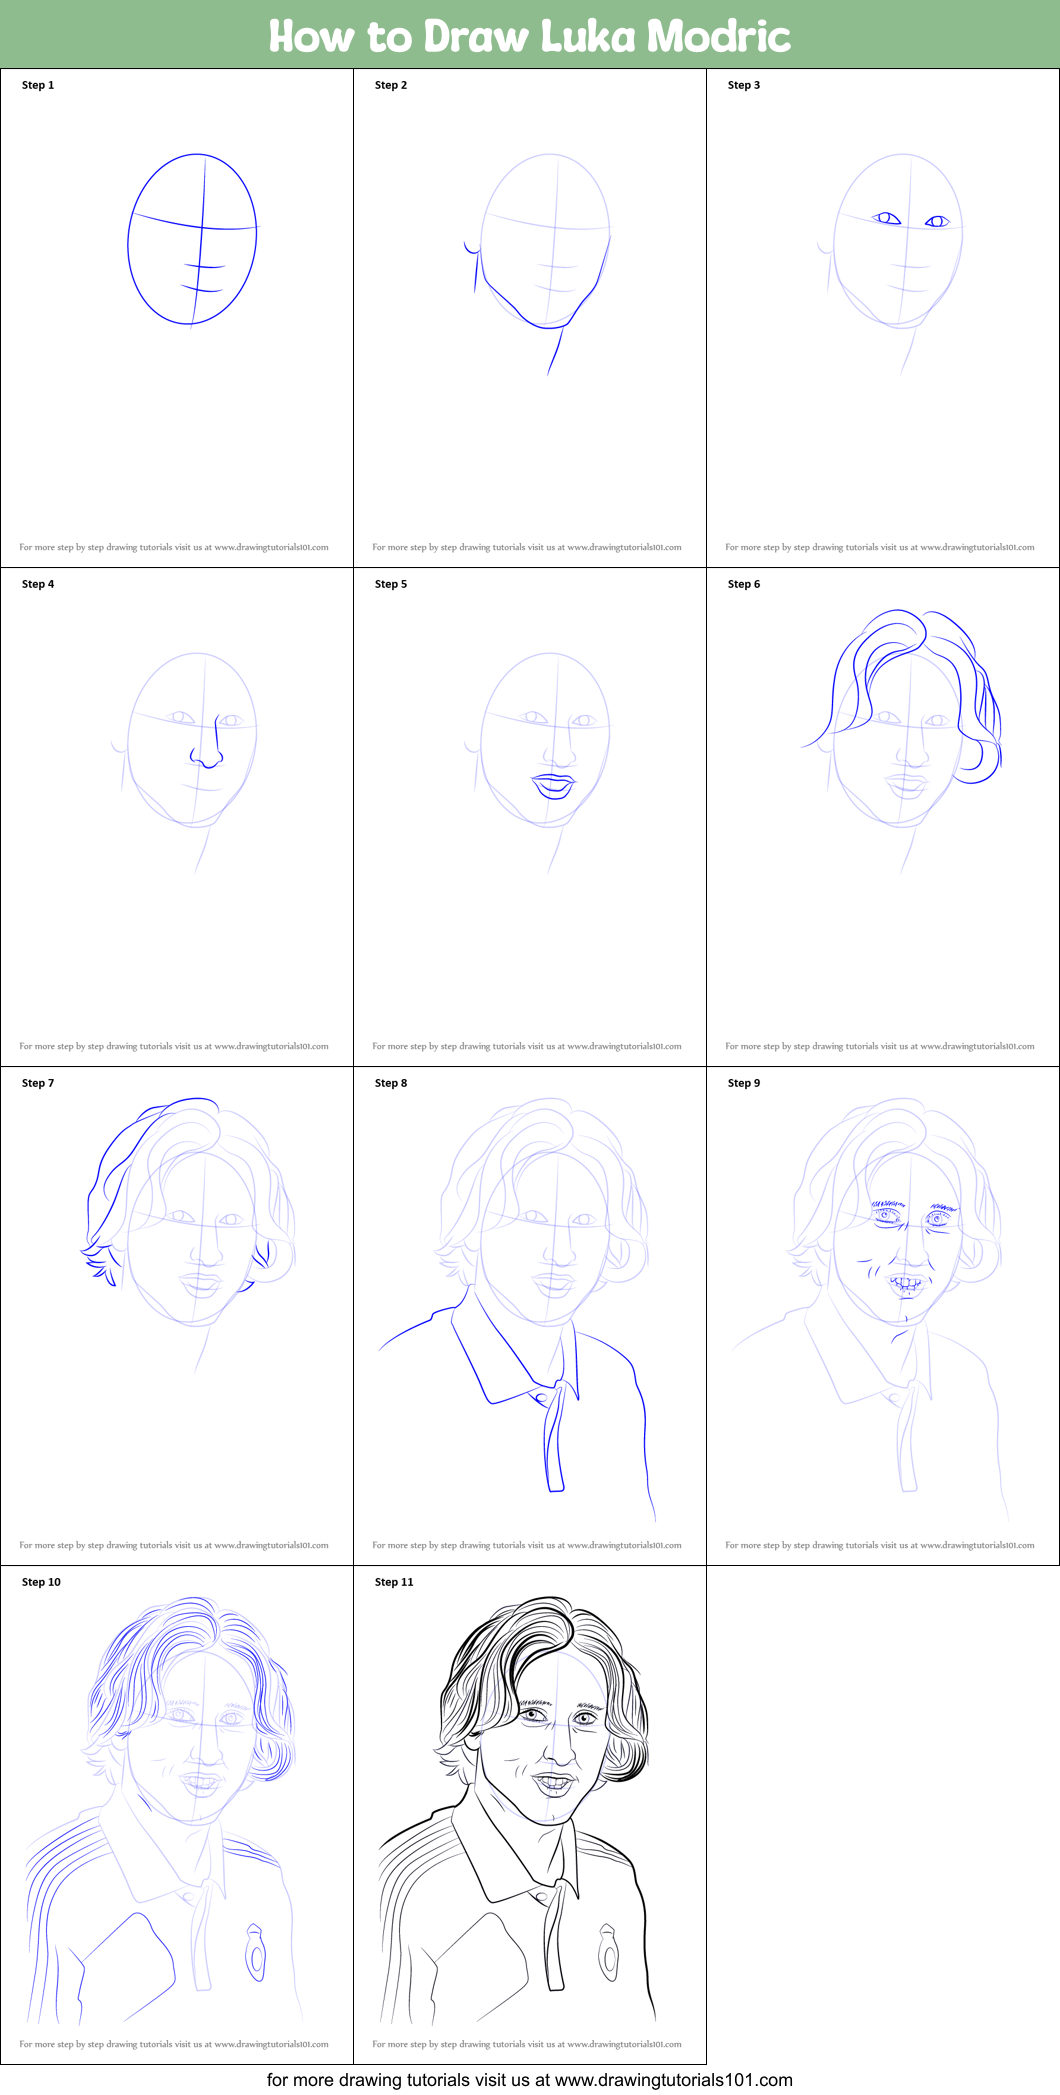 Download How to Draw Luka Modric printable step by step drawing sheet : DrawingTutorials101.com